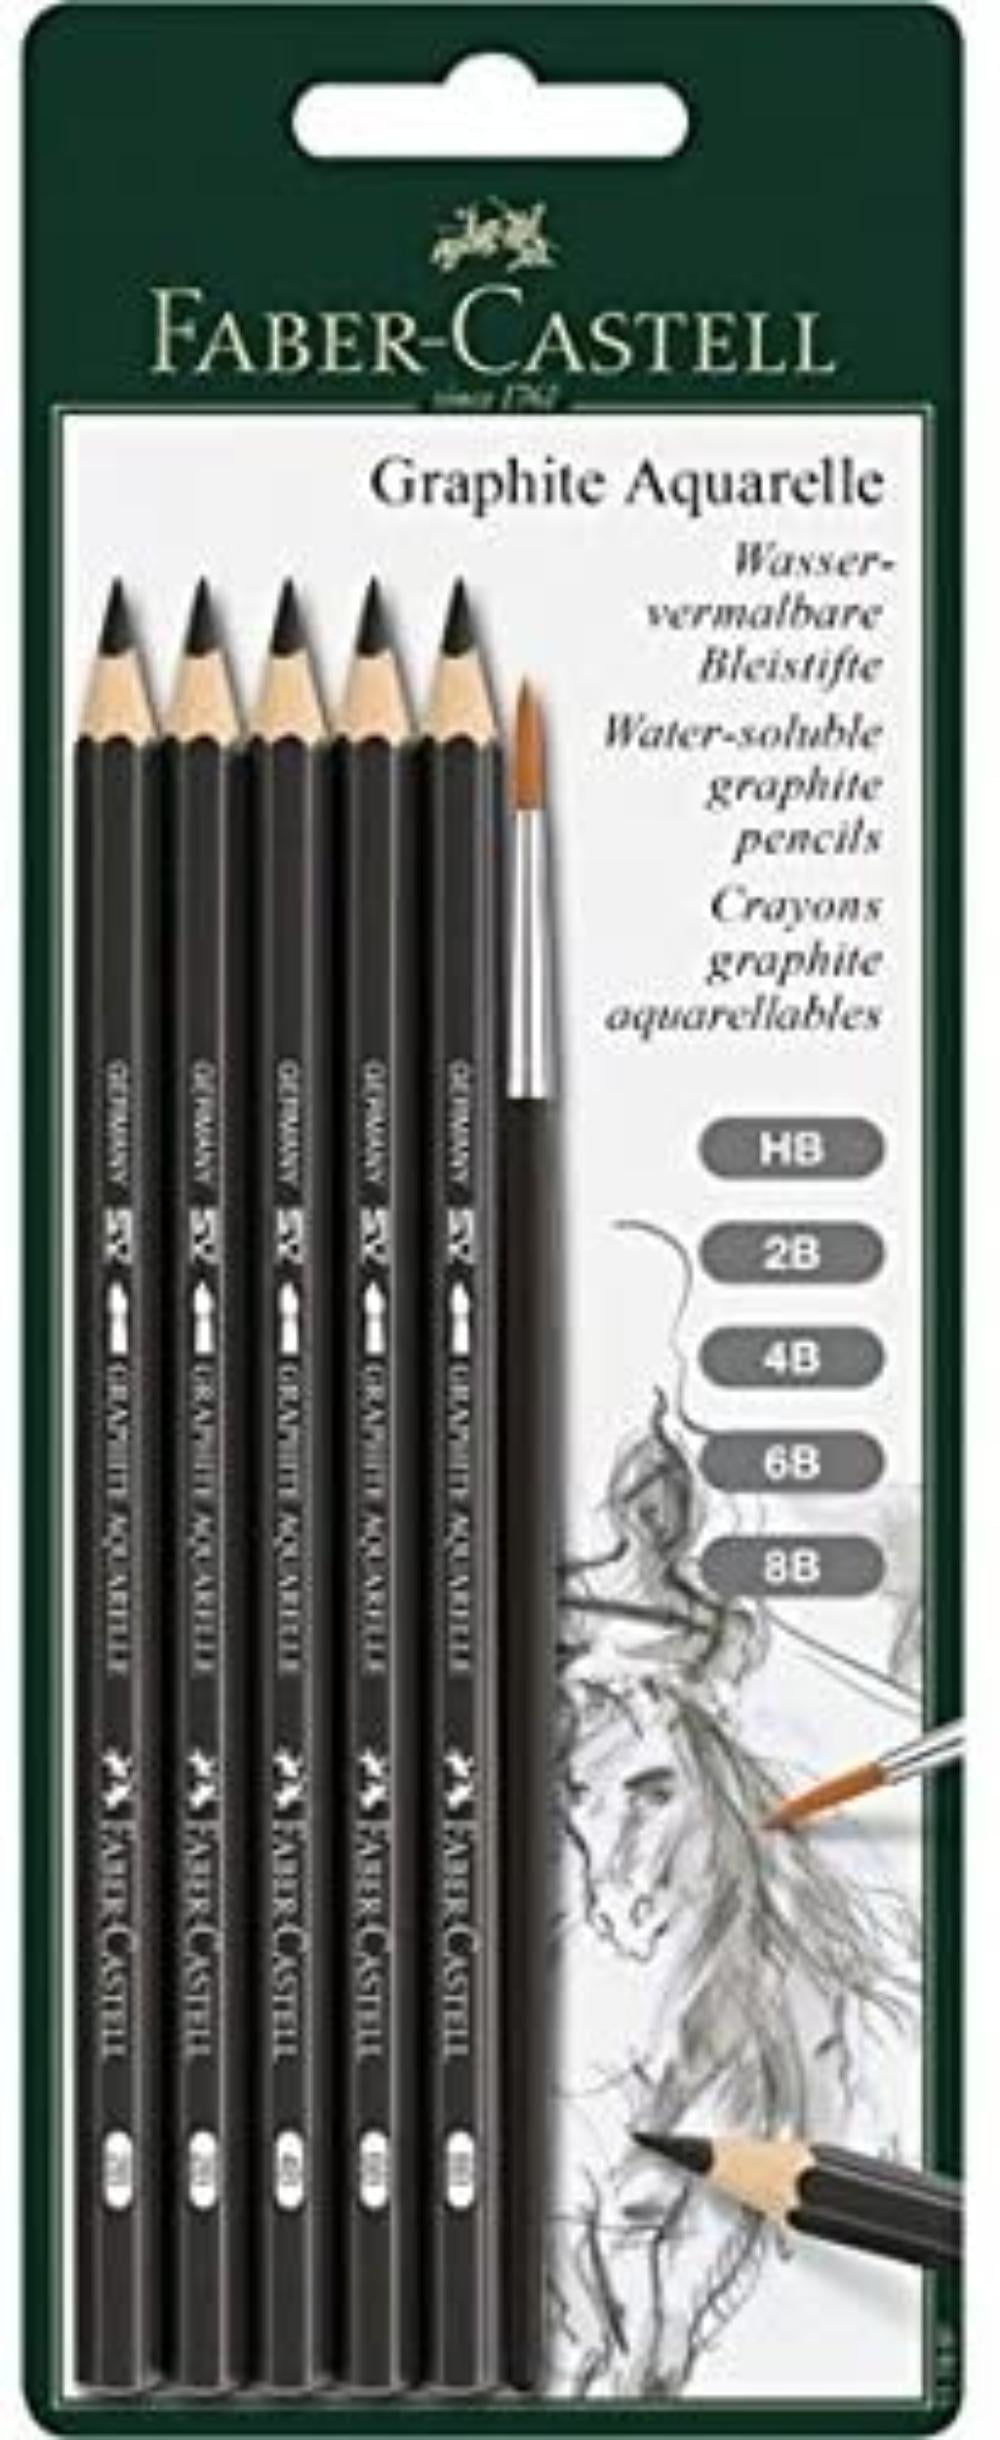 Faber-Castell Graphite Aquarelle Water-soluble Pencils assorted 